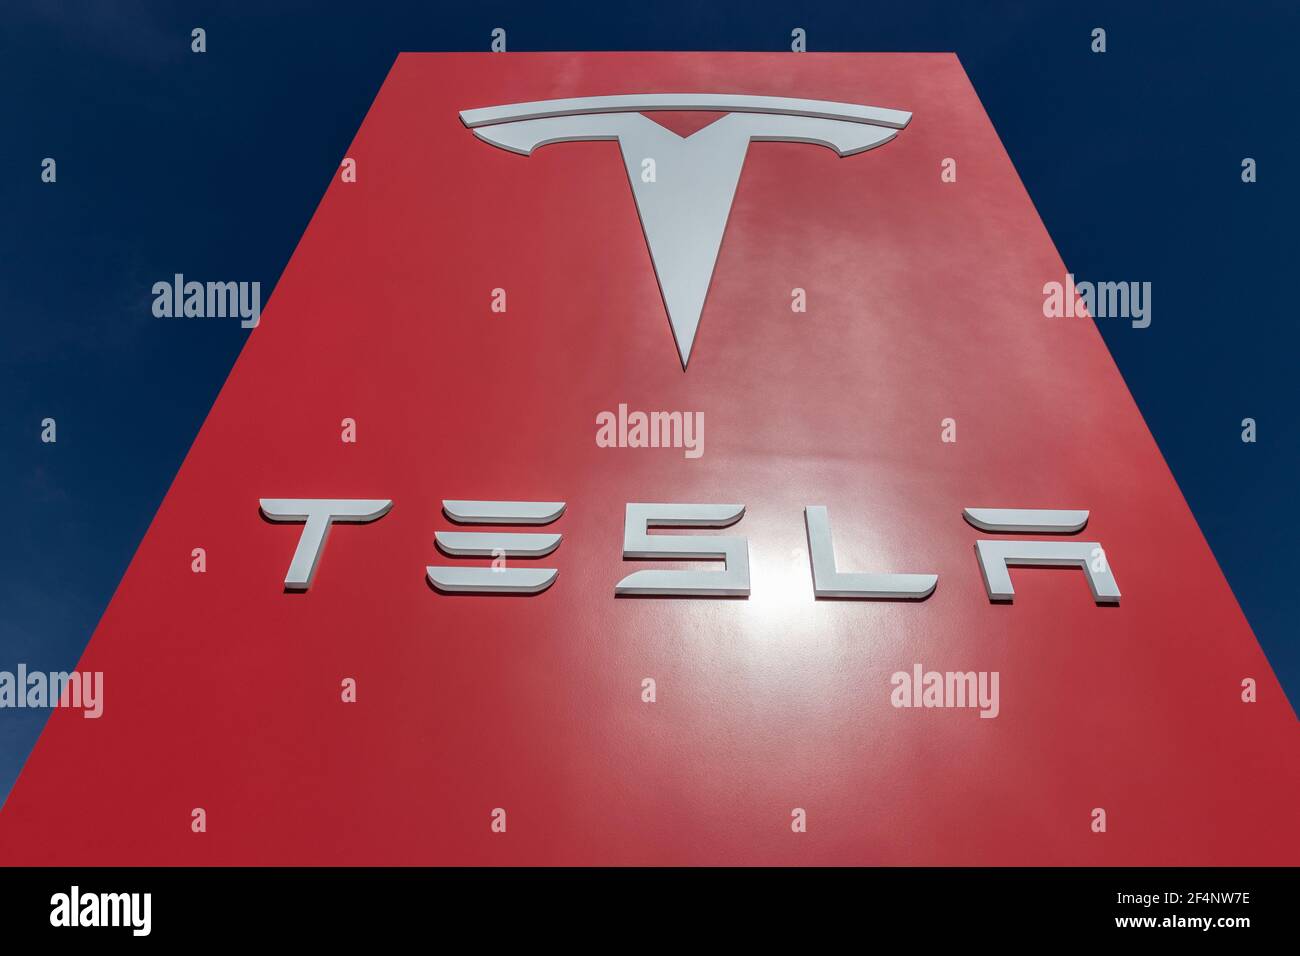 Indianapolis - Circa March 2021: Tesla electric vehicles logo. Tesla products include electric cars, battery energy storage and solar panels. Stock Photo